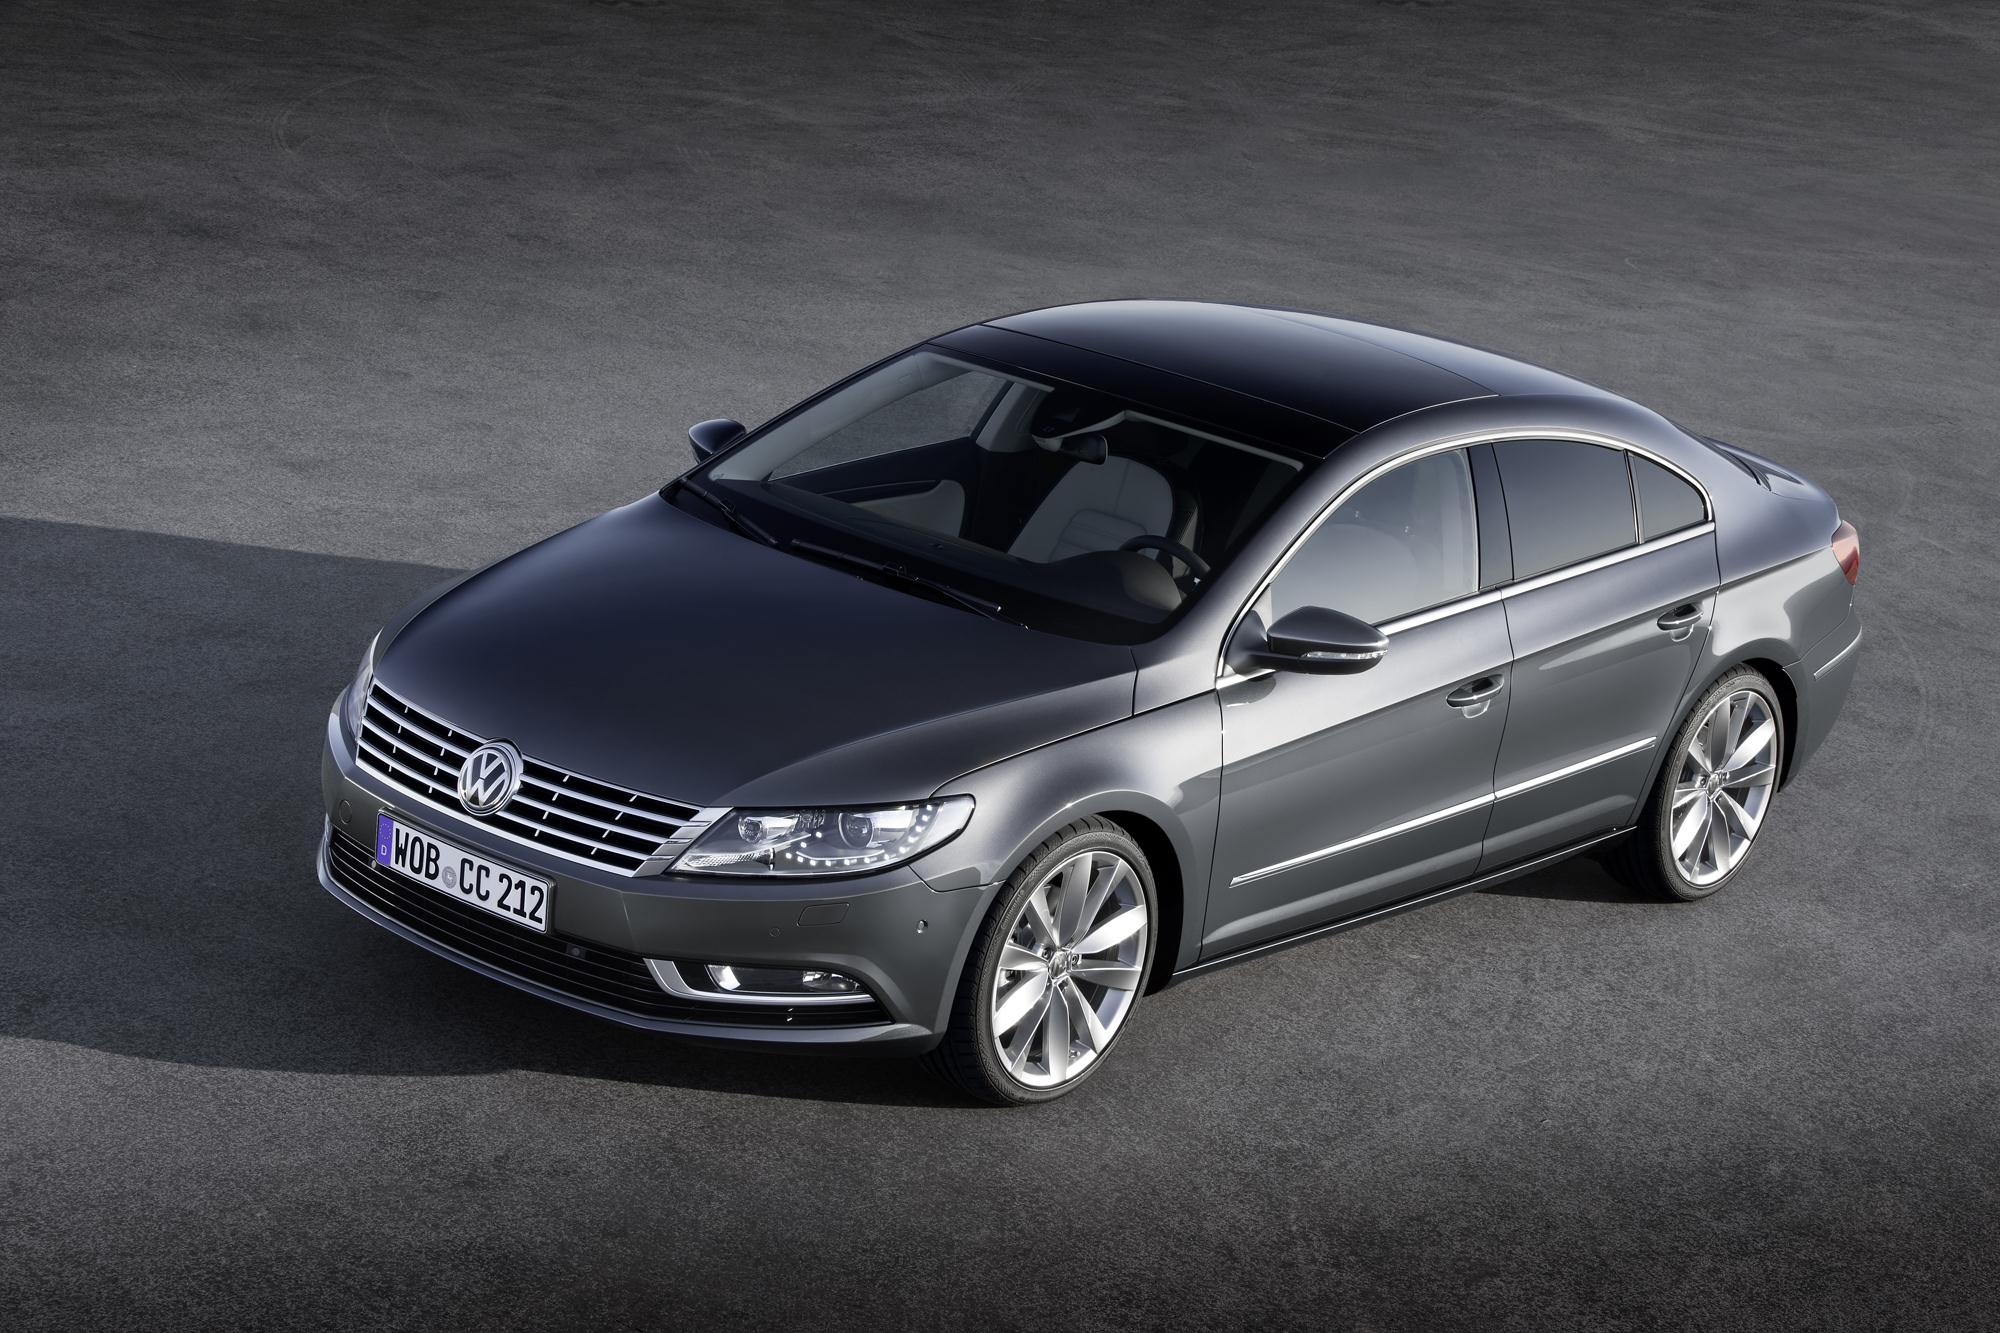 VW Passat CC 2.0 2013 MED17.5.2 Stage 3 Injector Scaling MAF Scaling 480hp 550nm by ChiptuneRS